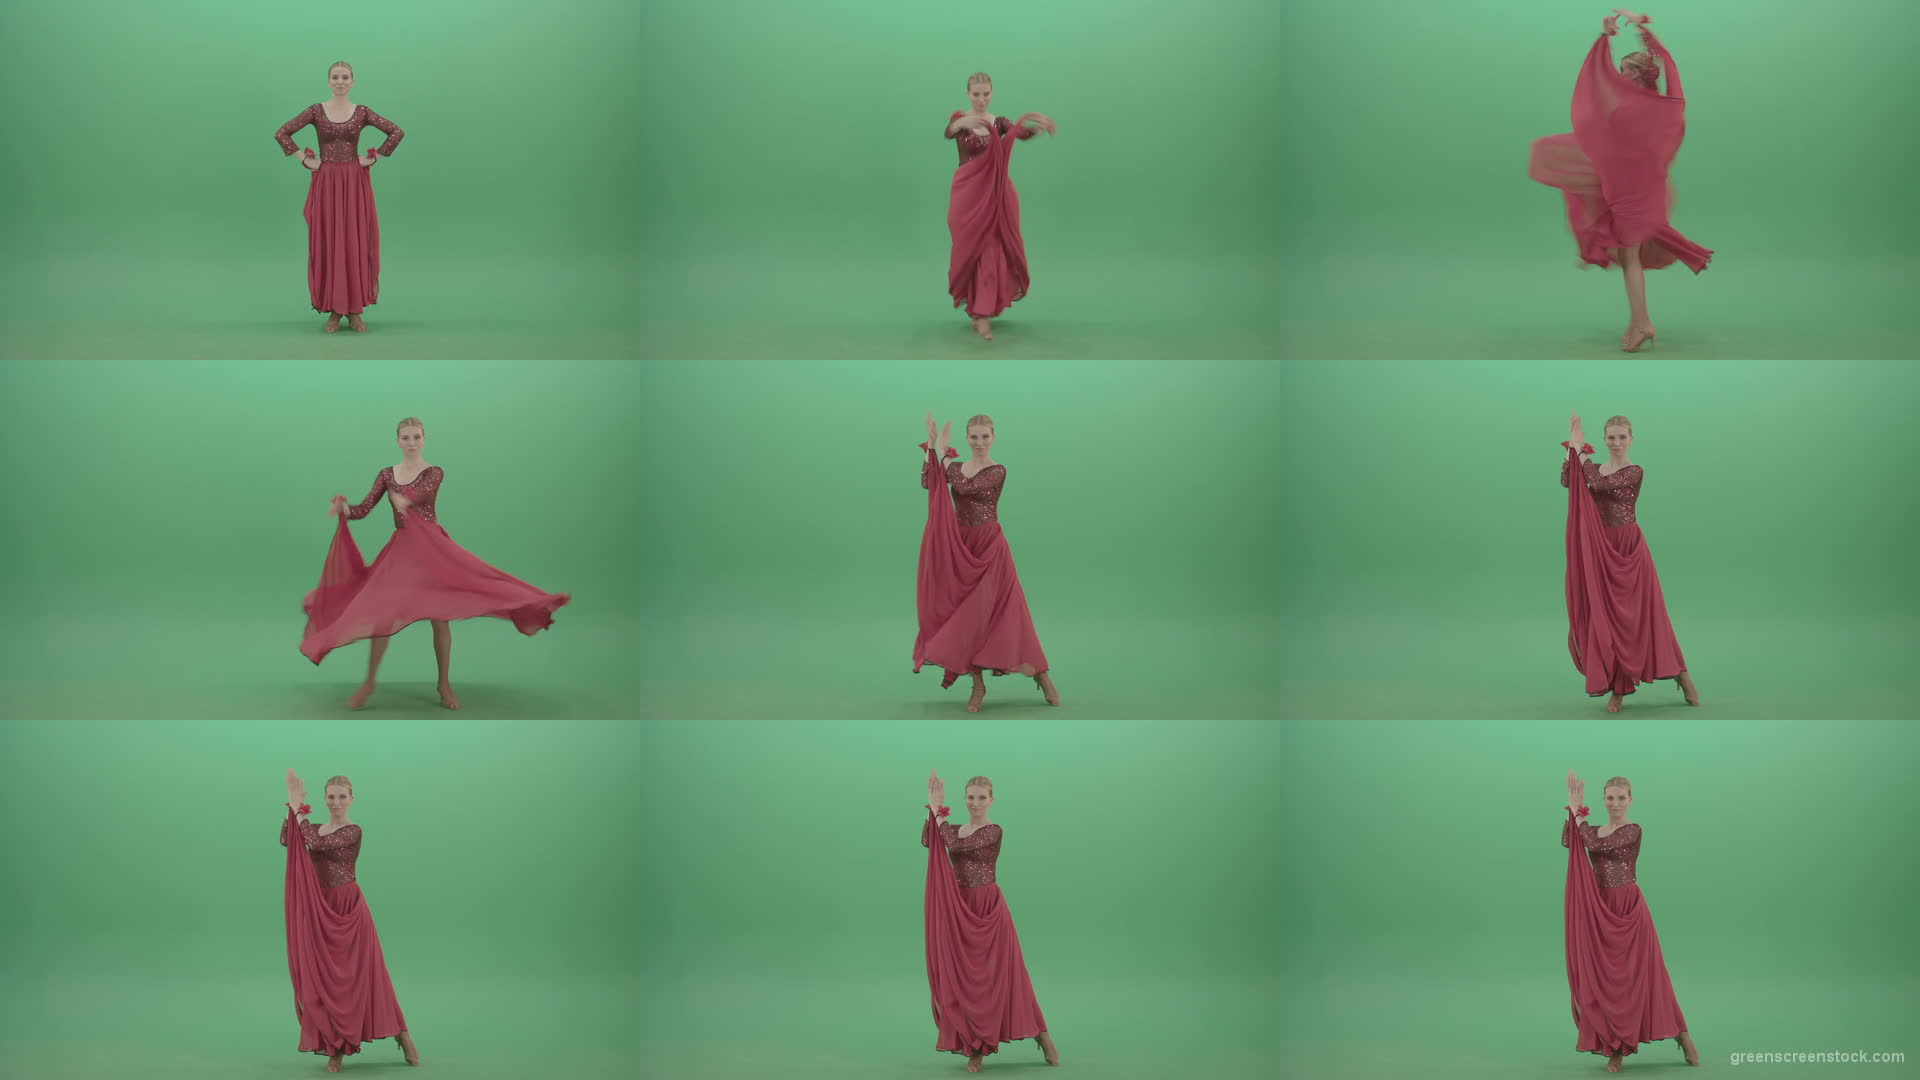 Elegant-woman-in-red-ballroom-dress-spinning-and-clapping-in-hands-isolated-on-green-screen-4K-Video-Footage-1920 Green Screen Stock